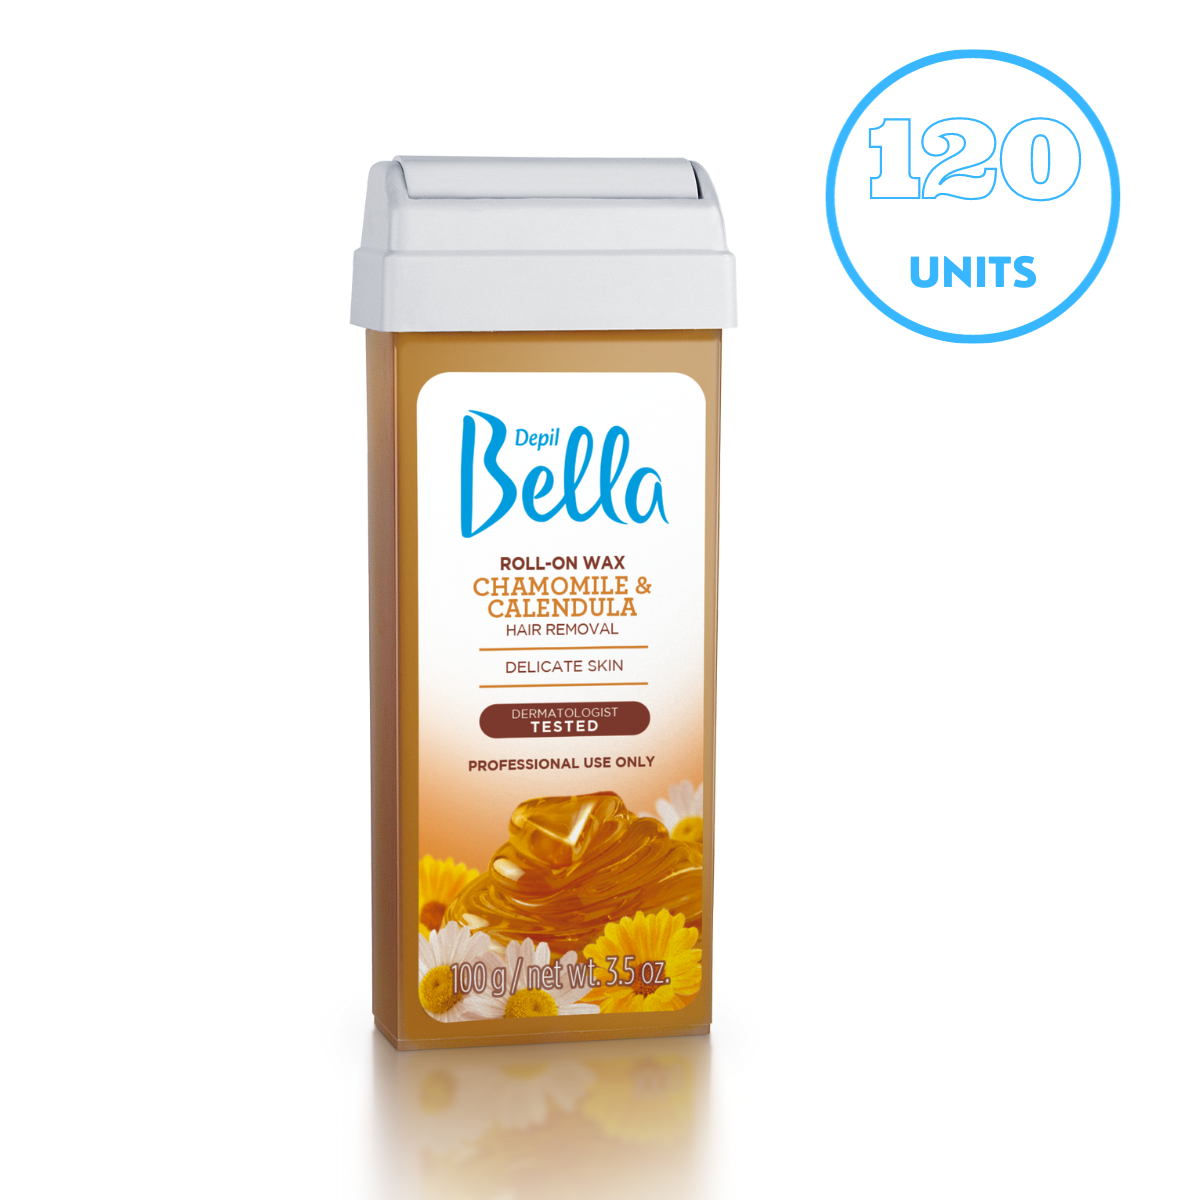 Depil Bella Chamomile and Calendula Roll-On Depilatory Wax, 3.52oz, (120 Units offer) - Buy professional cosmetics dedicated to hair removal